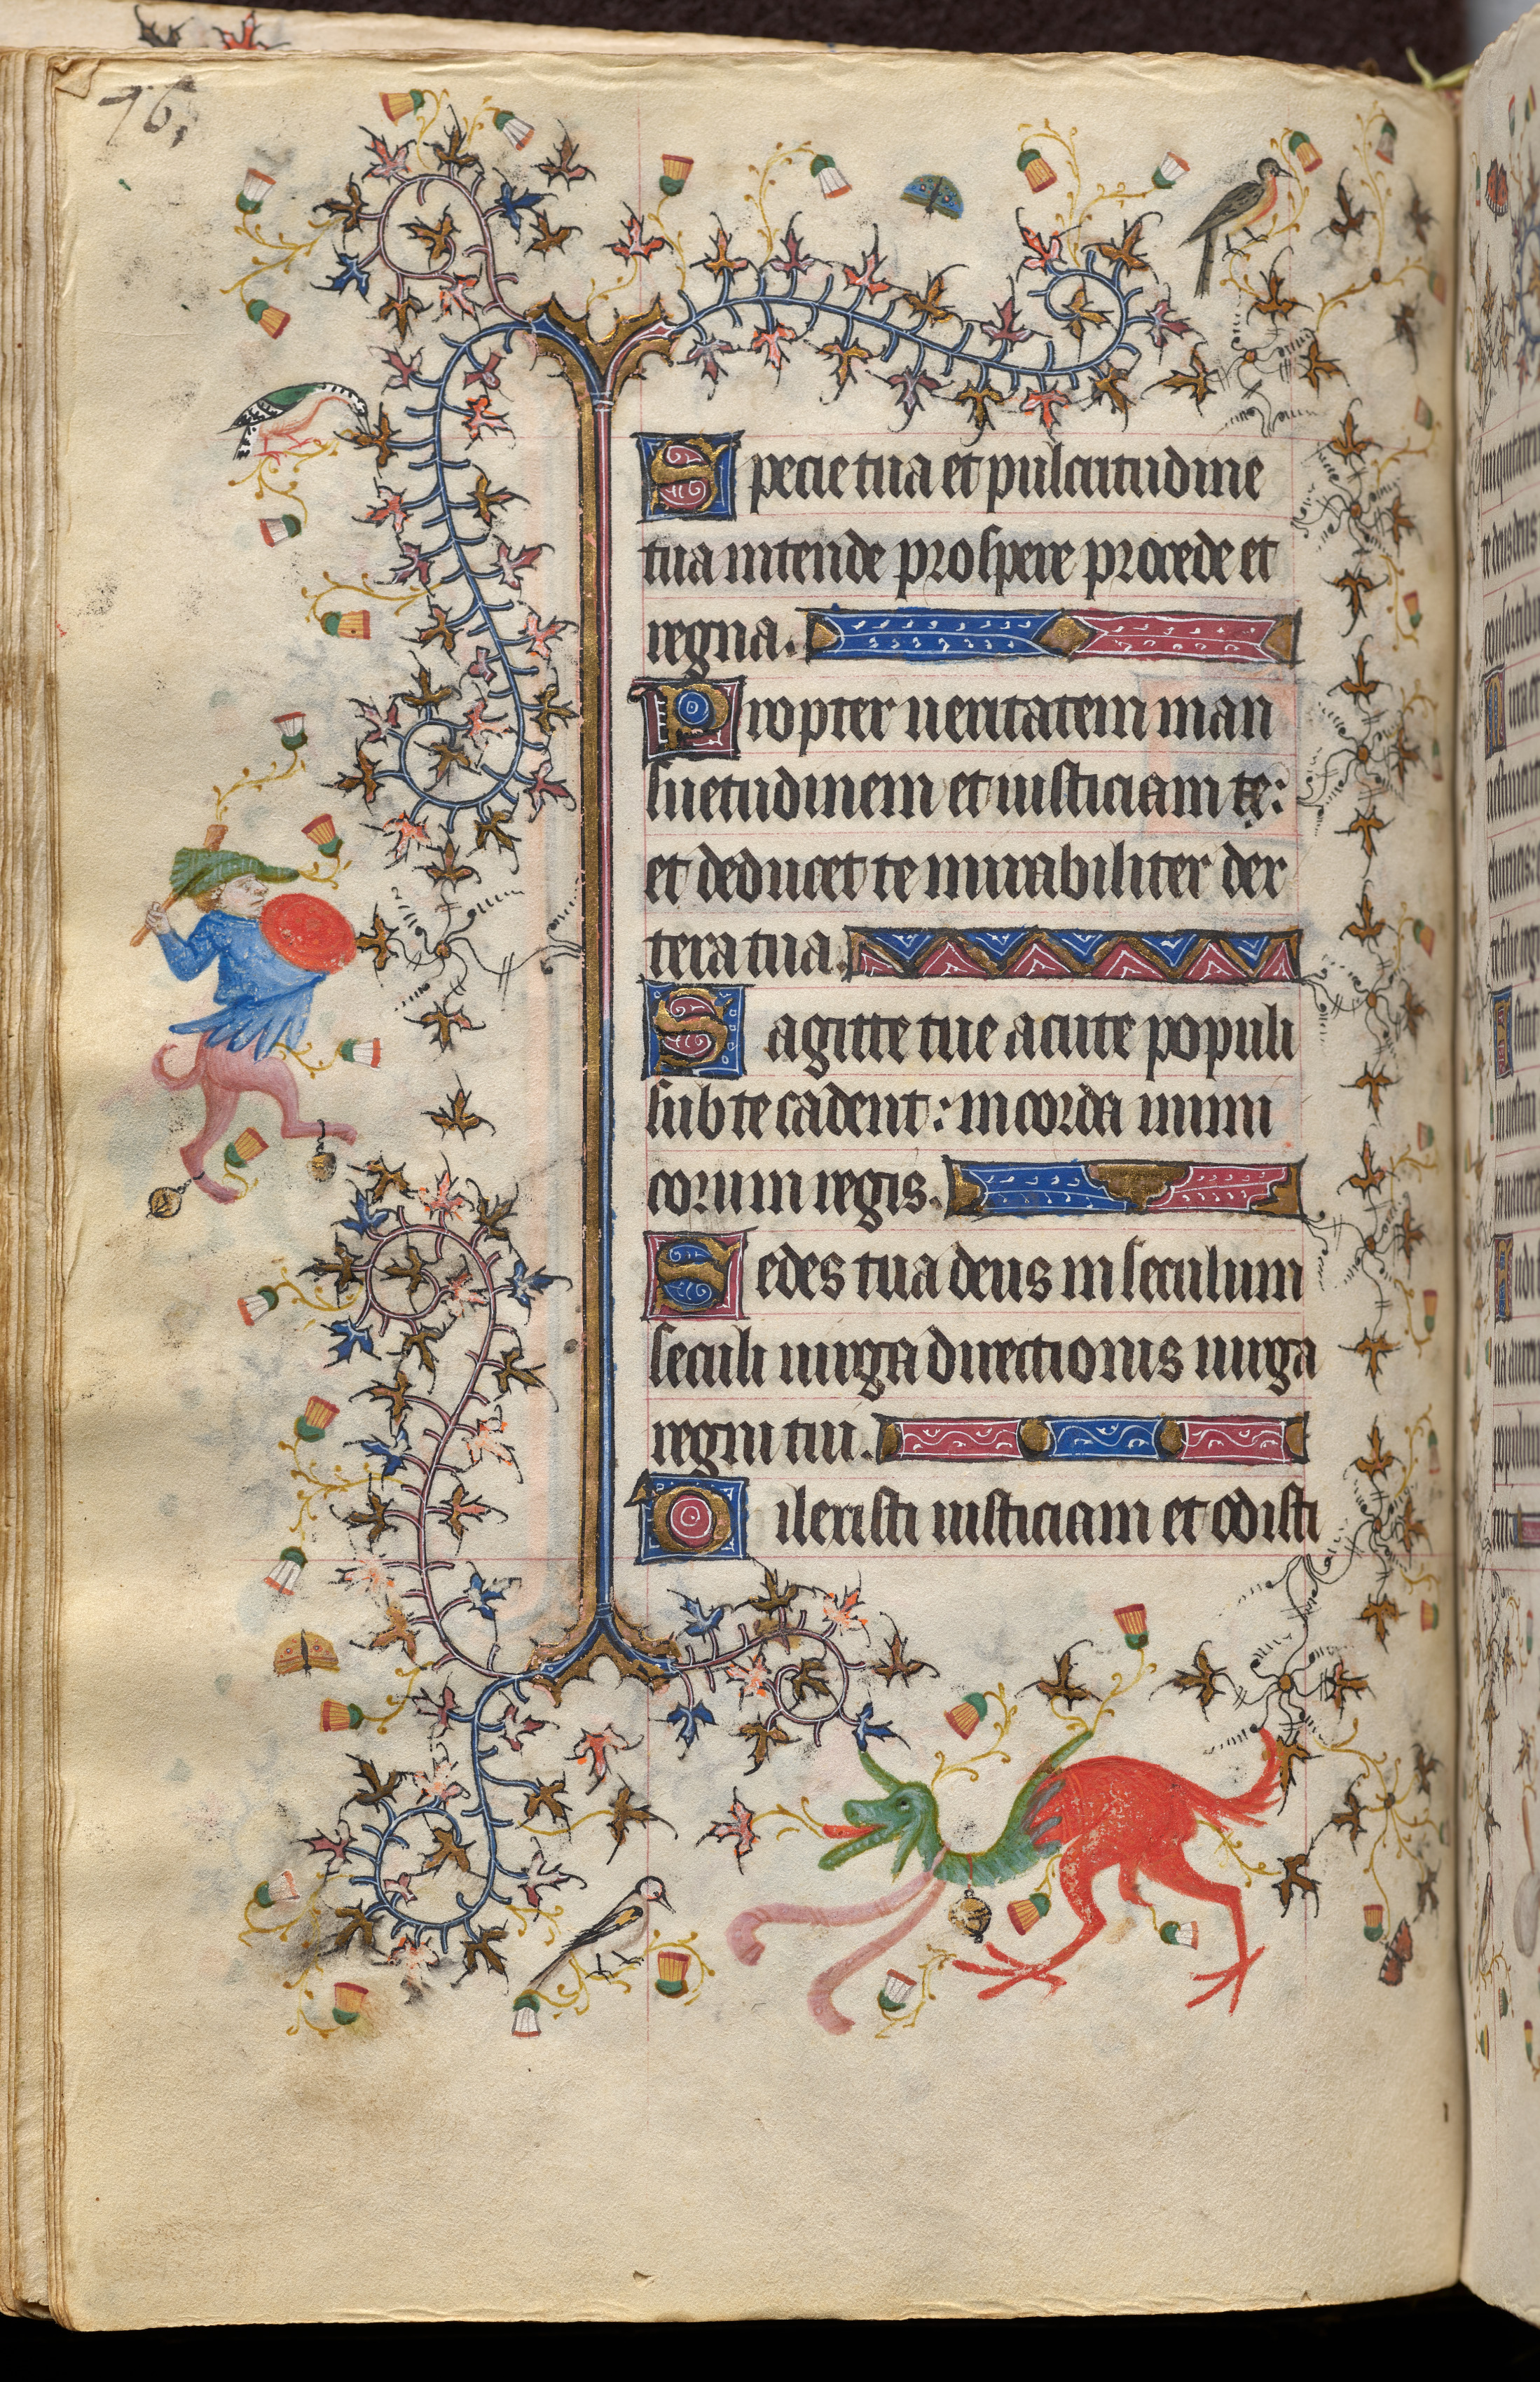 Hours of Charles the Noble, King of Navarre (1361-1425): fol. 38v, Text